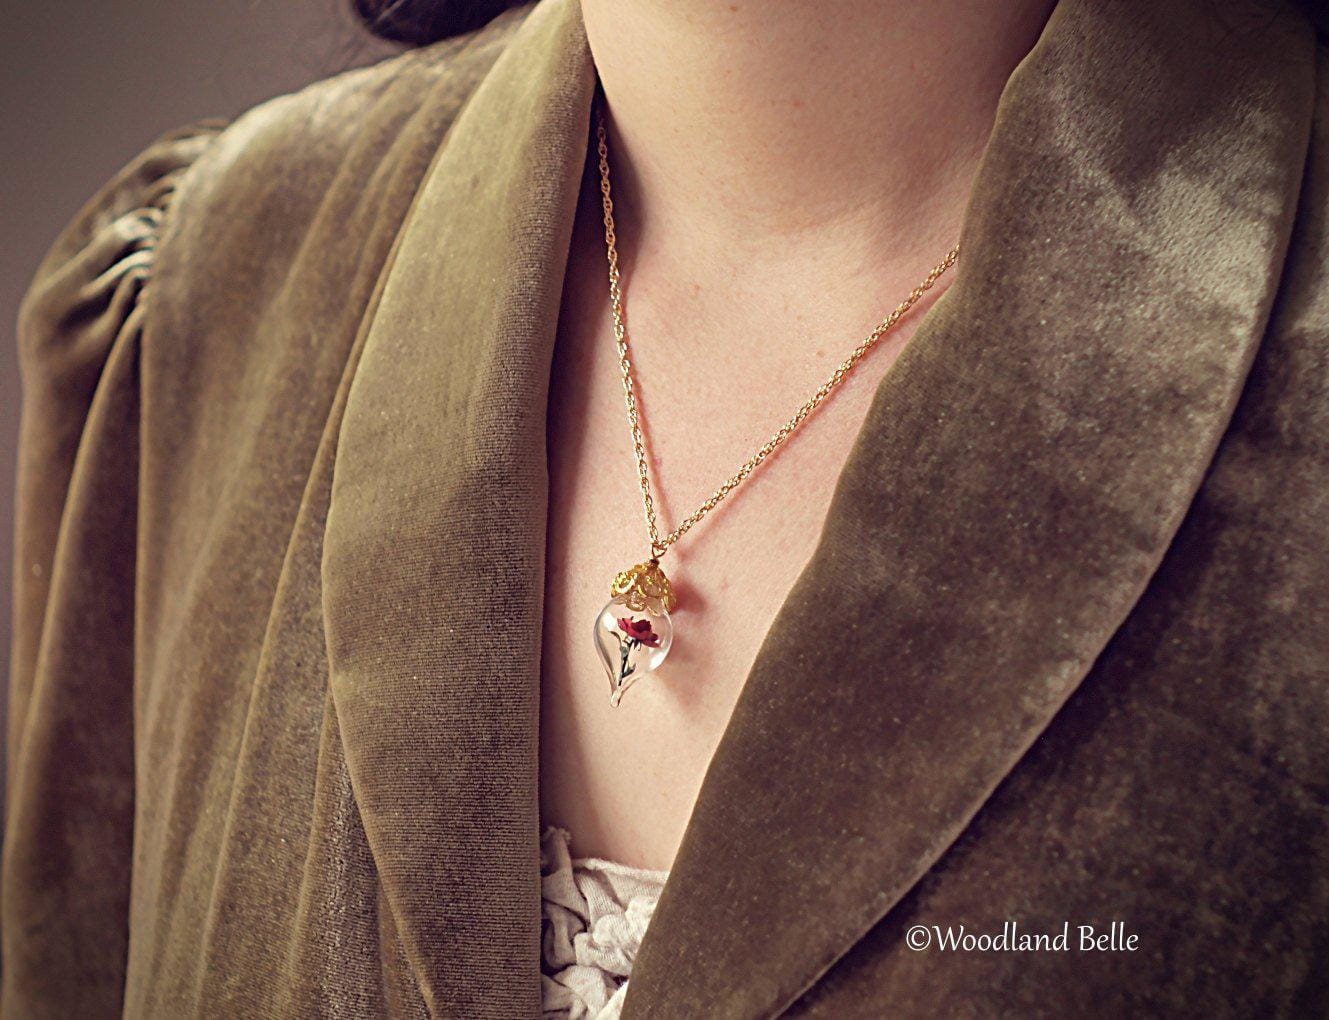 Burgundy Peony Necklace - Gold Glass Flower Pendant -Personalized Gift- Wife, Anniversary- Gold/Sterling Silver/Rose Gold -By Woodland Belle